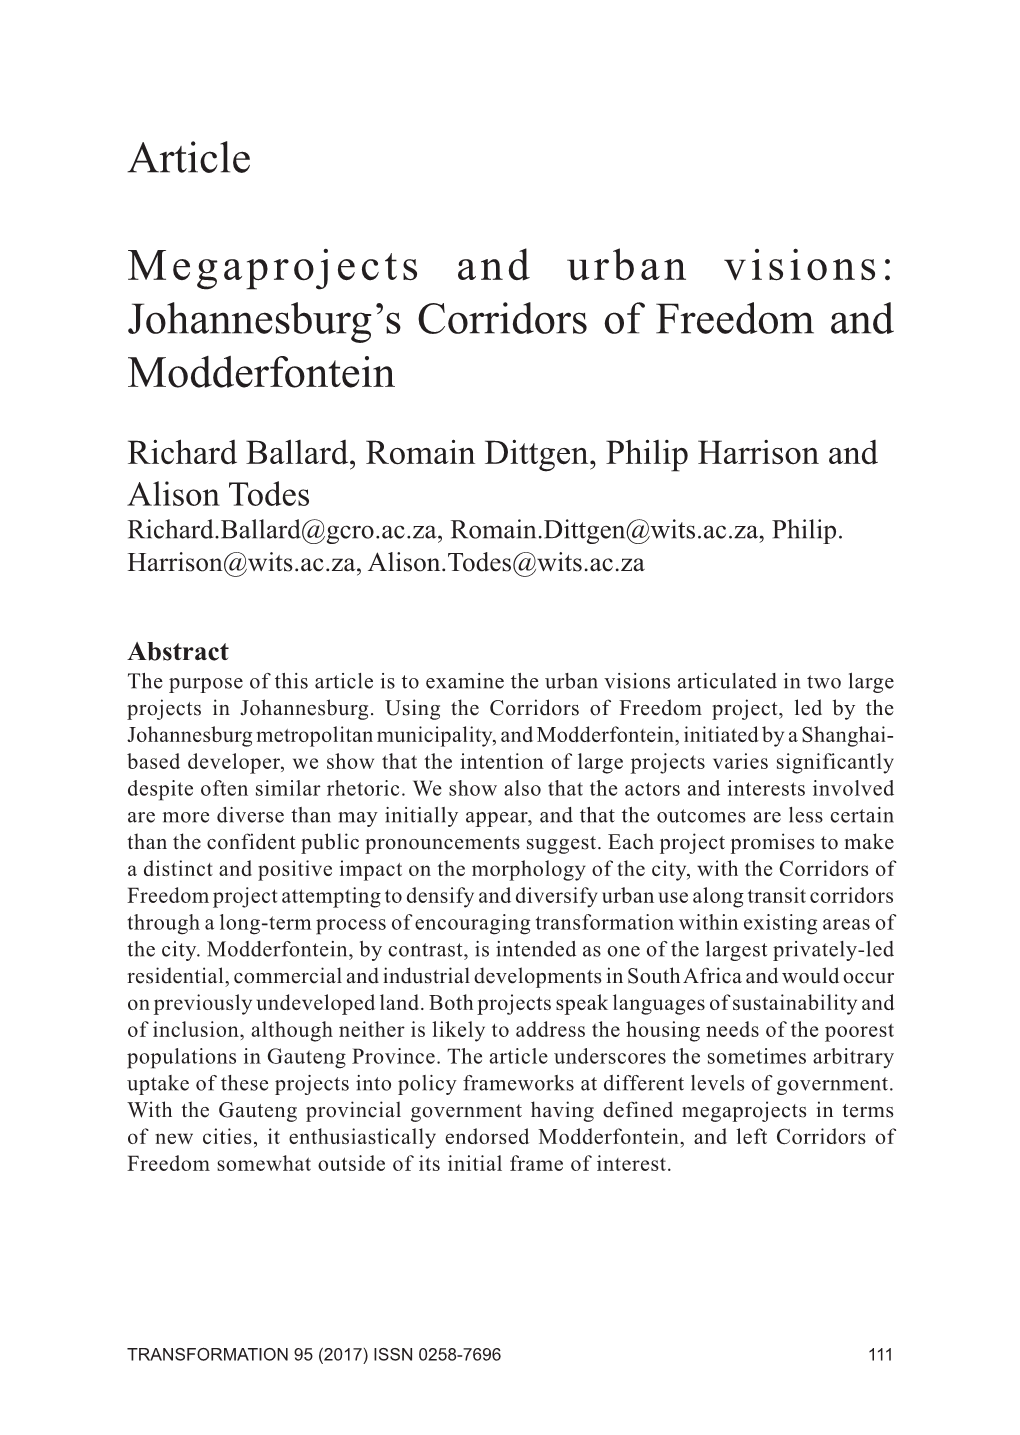 Article Megaprojects and Urban Visions: Johannesburg's Corridors of Freedom and Modderfontein